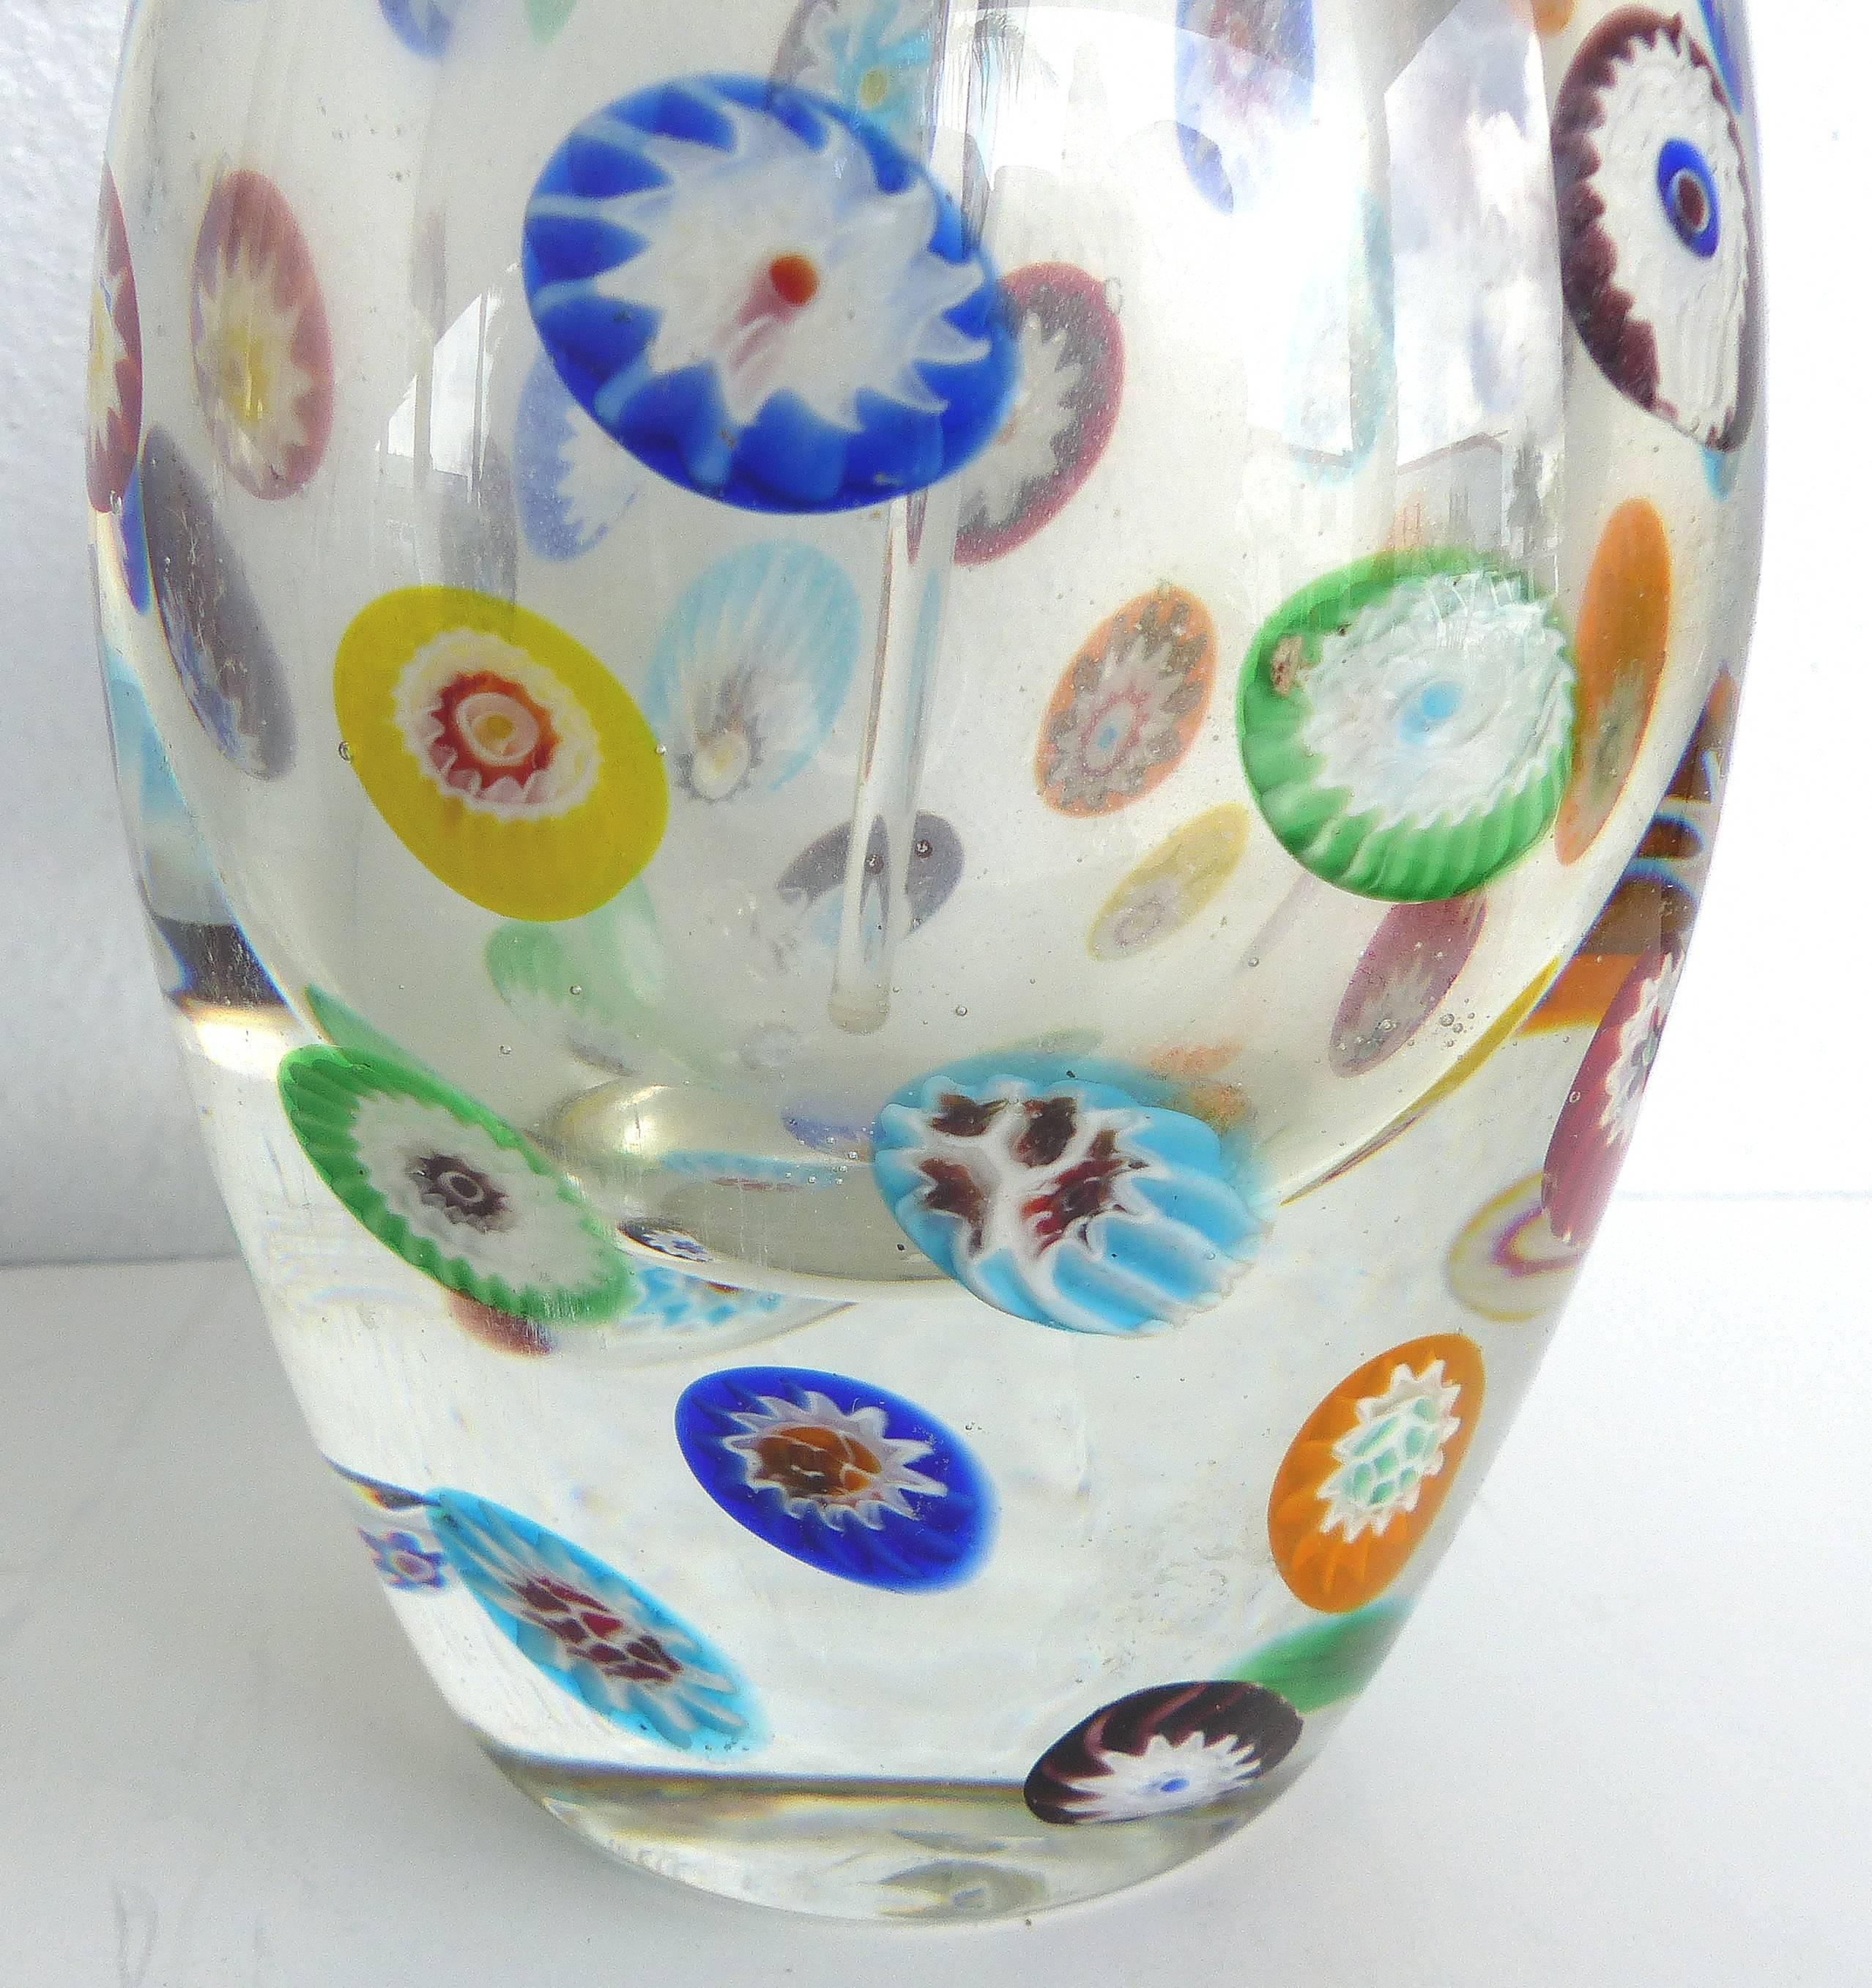 A large Murano Gambaro & Poggi colored Millefiori glass scent bottle with stopper. The vessel makes unusual use of Millefiori sparsely placed against a clear base. The bottle is topped with a large gold dusted ball stopper. The ground glass stopper